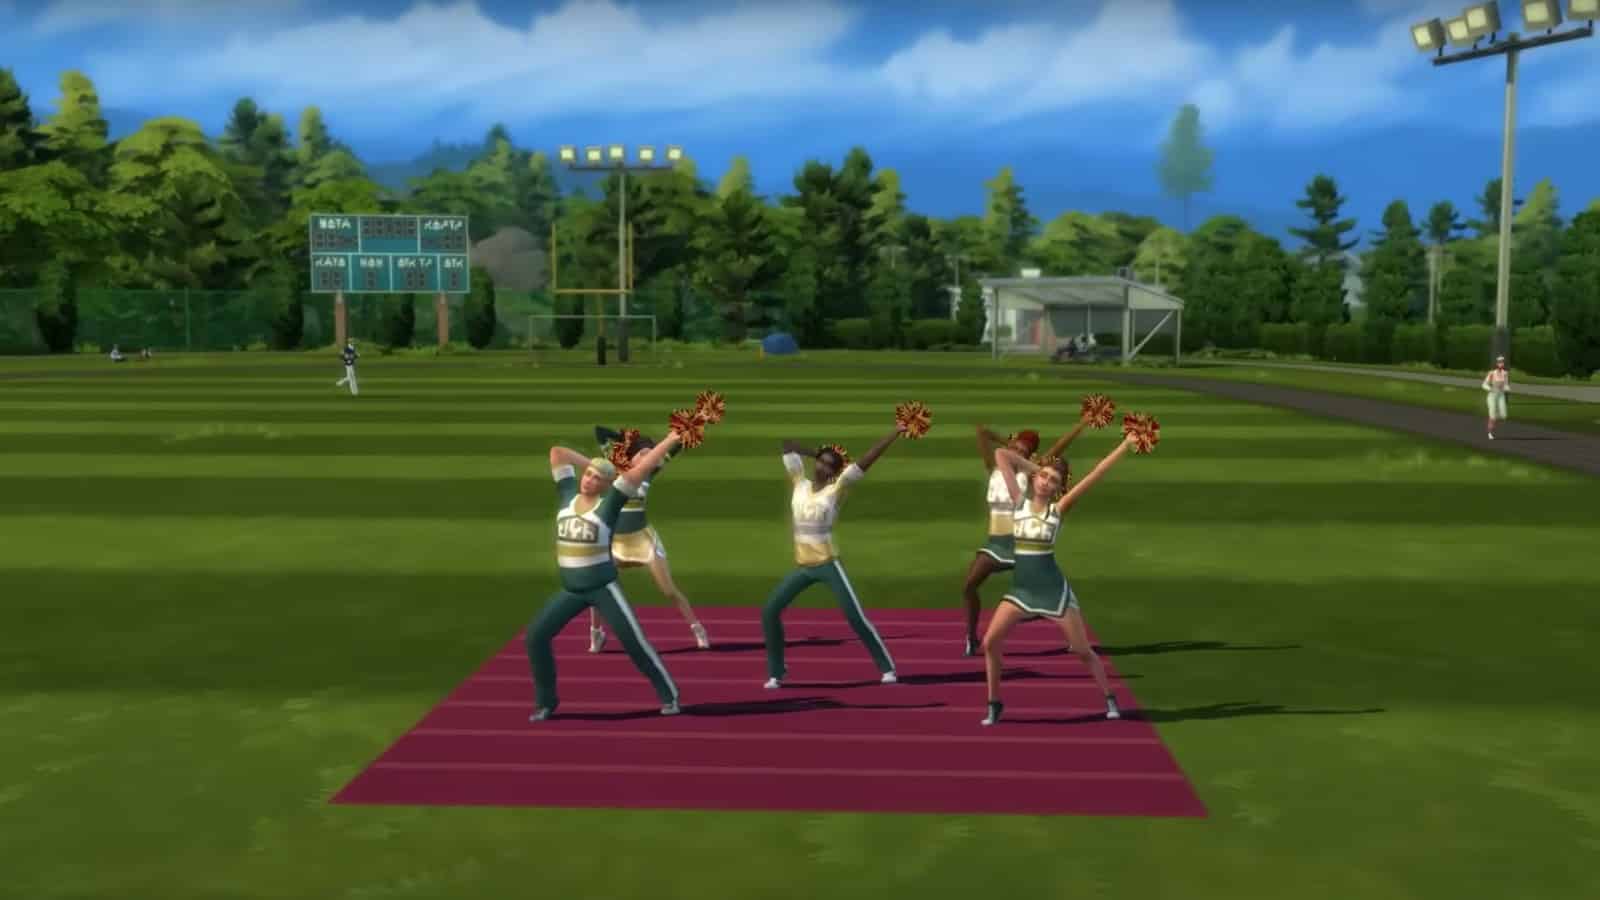 The Sims 4 High School Years screenshot featuring a cheerleader squad during practice on the football field.